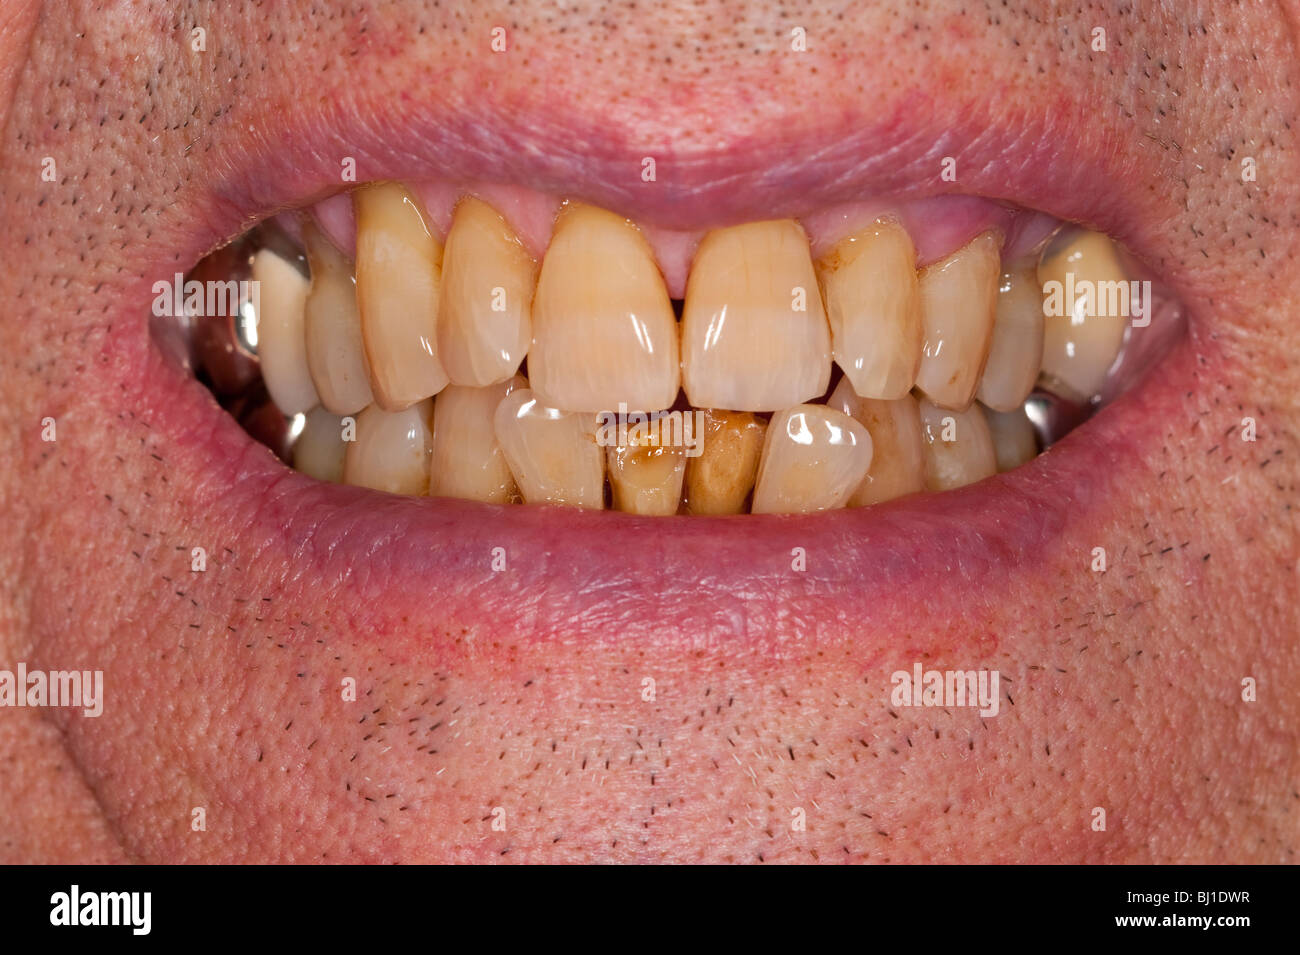 How Do You Know if Your Tooth is Rotten?